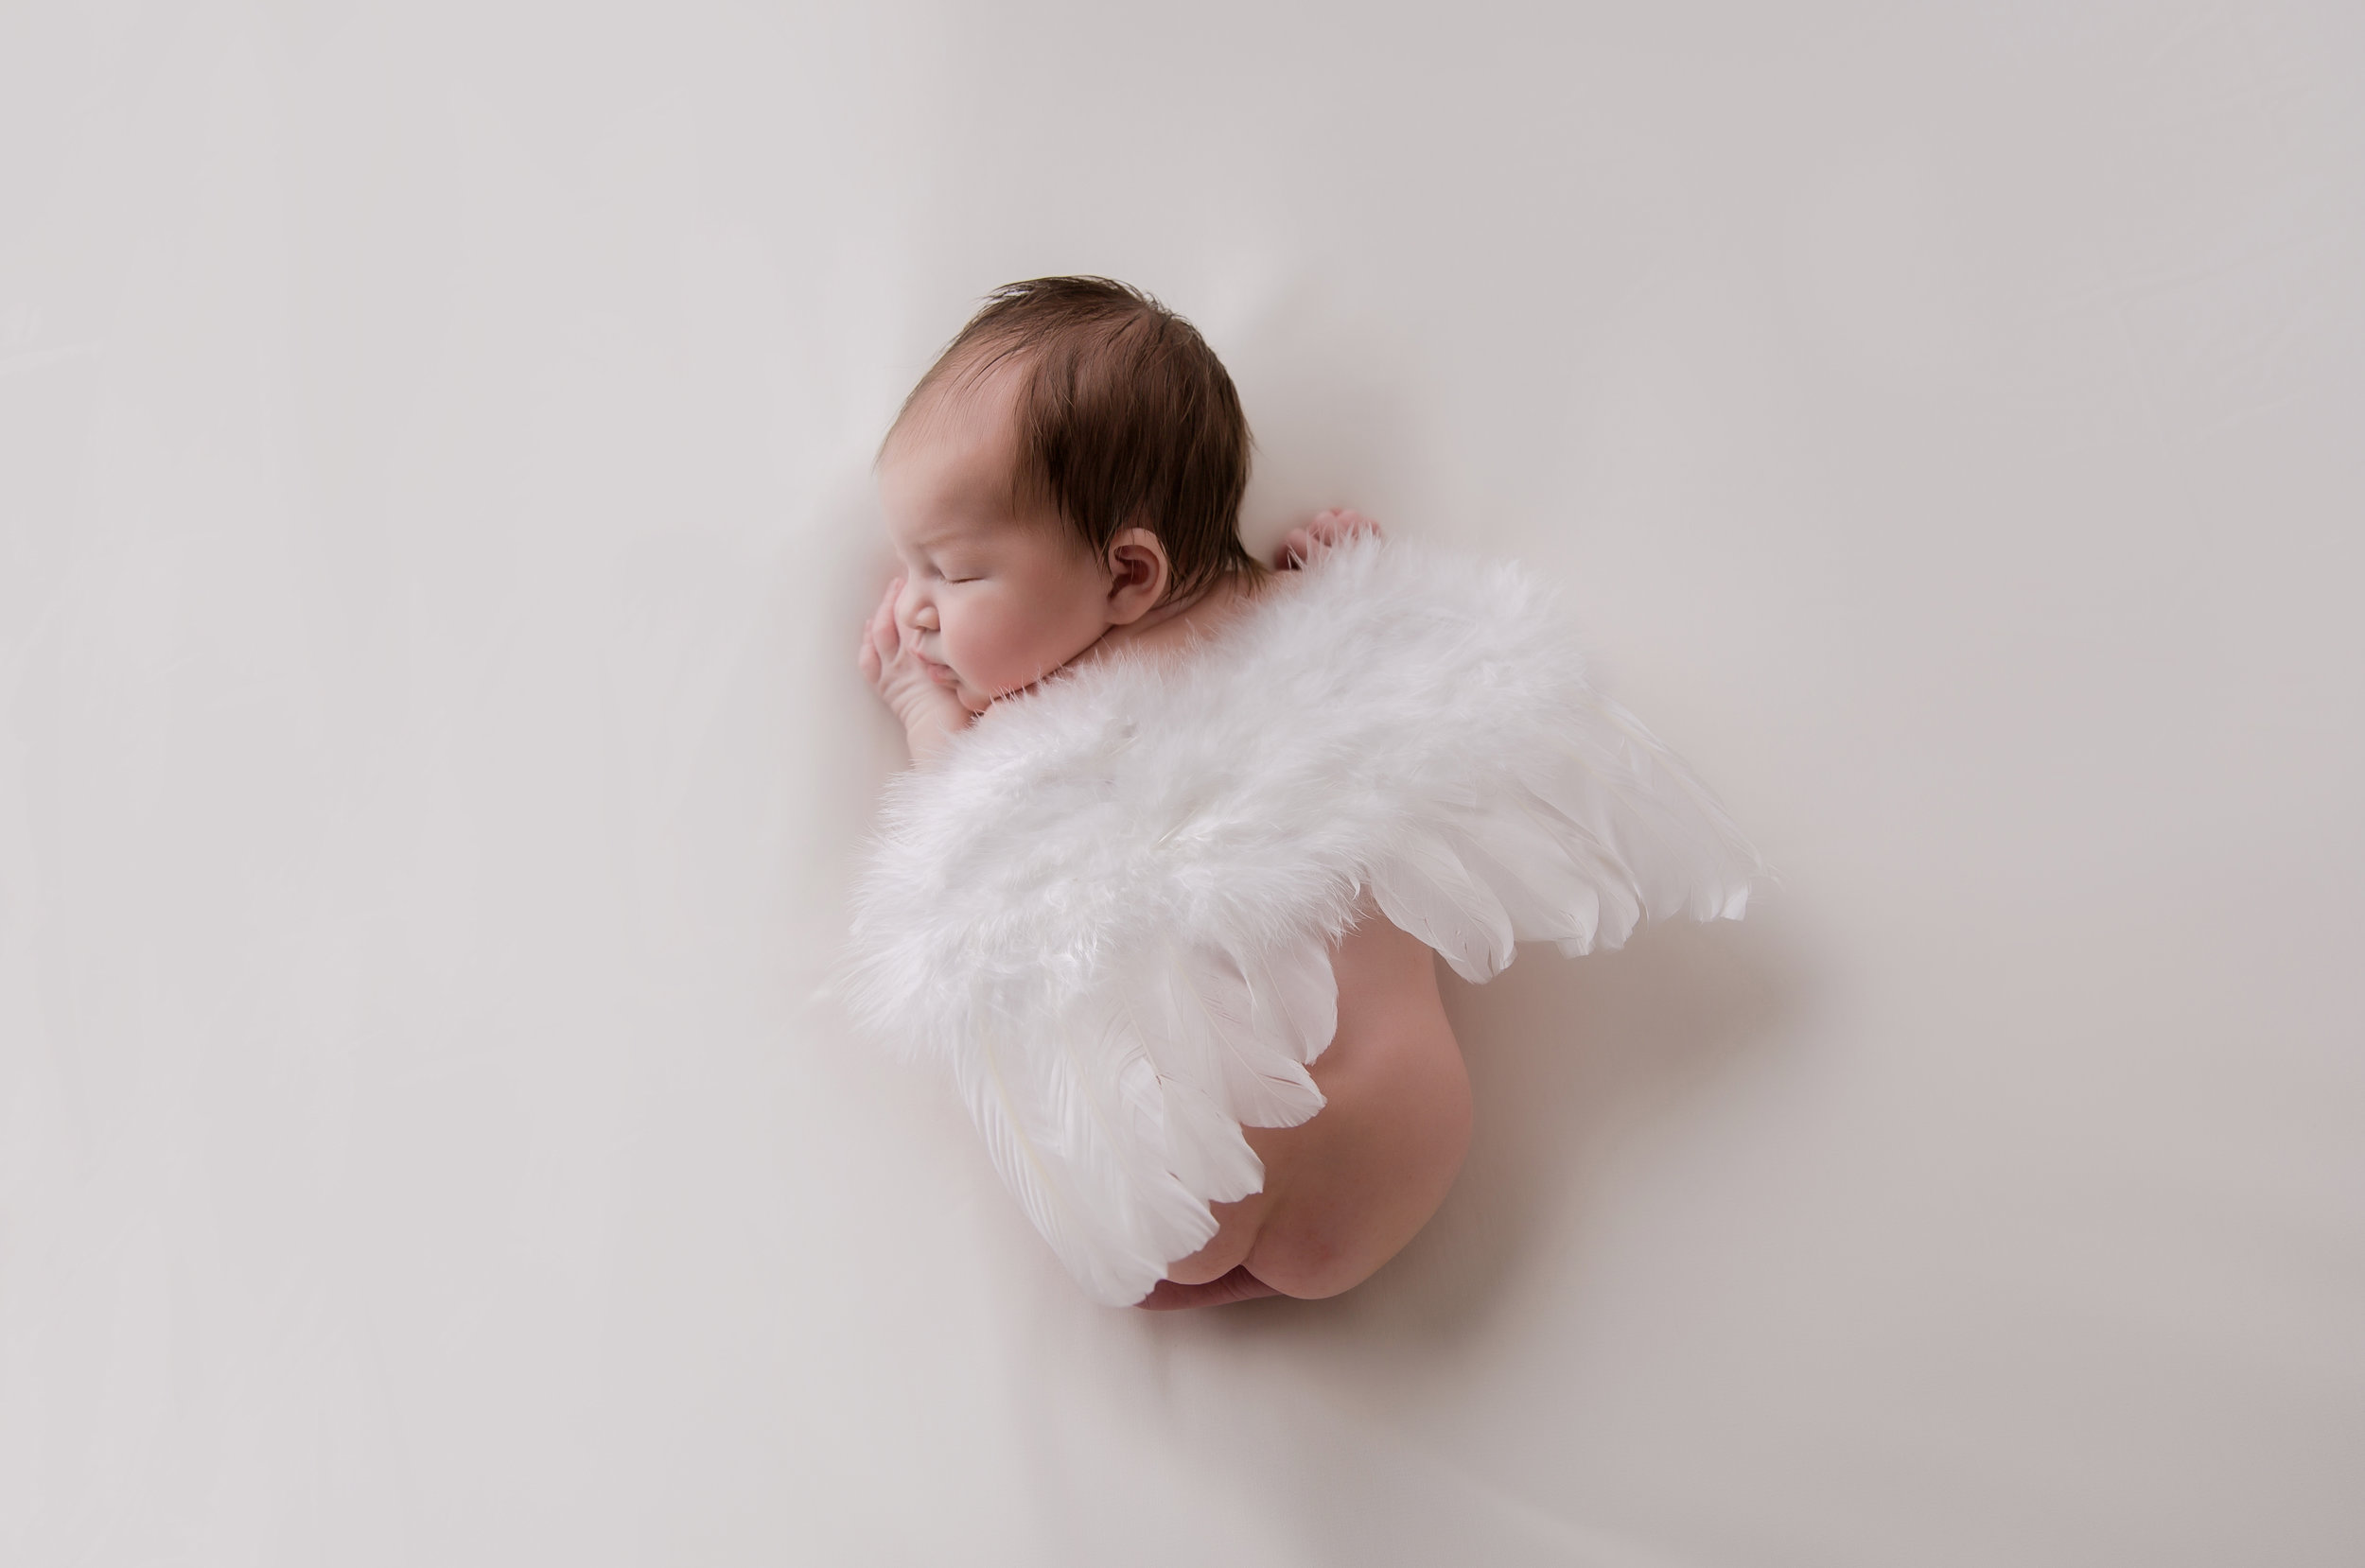 photo of a baby wearing angel wings